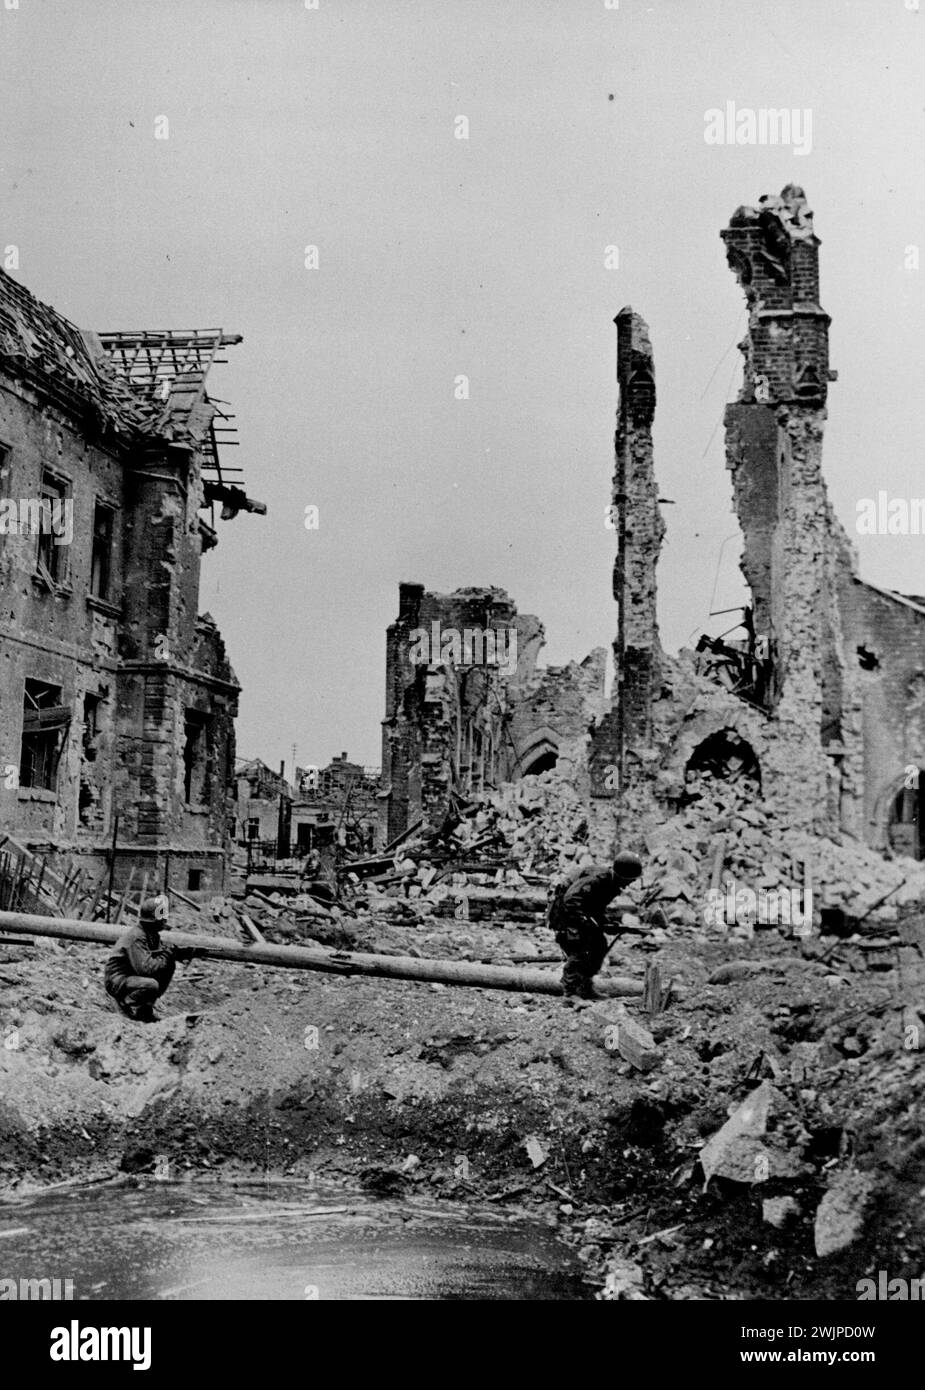 U.S. Soldiers Patrol Fraulautern -- Two infantrymen of the 65th division, third U.S. Army, advance past a water-filled bomb crater in Fraulautern, Germany, March 20, 1945 as they patrol the town for Nazi stragglers. A wrecked church is in the background. Fraulautorn is 10 miles northwest of Saarbarucken. January 1, 1945. (Photo by U.S. Signal Corps Photo). Stock Photo